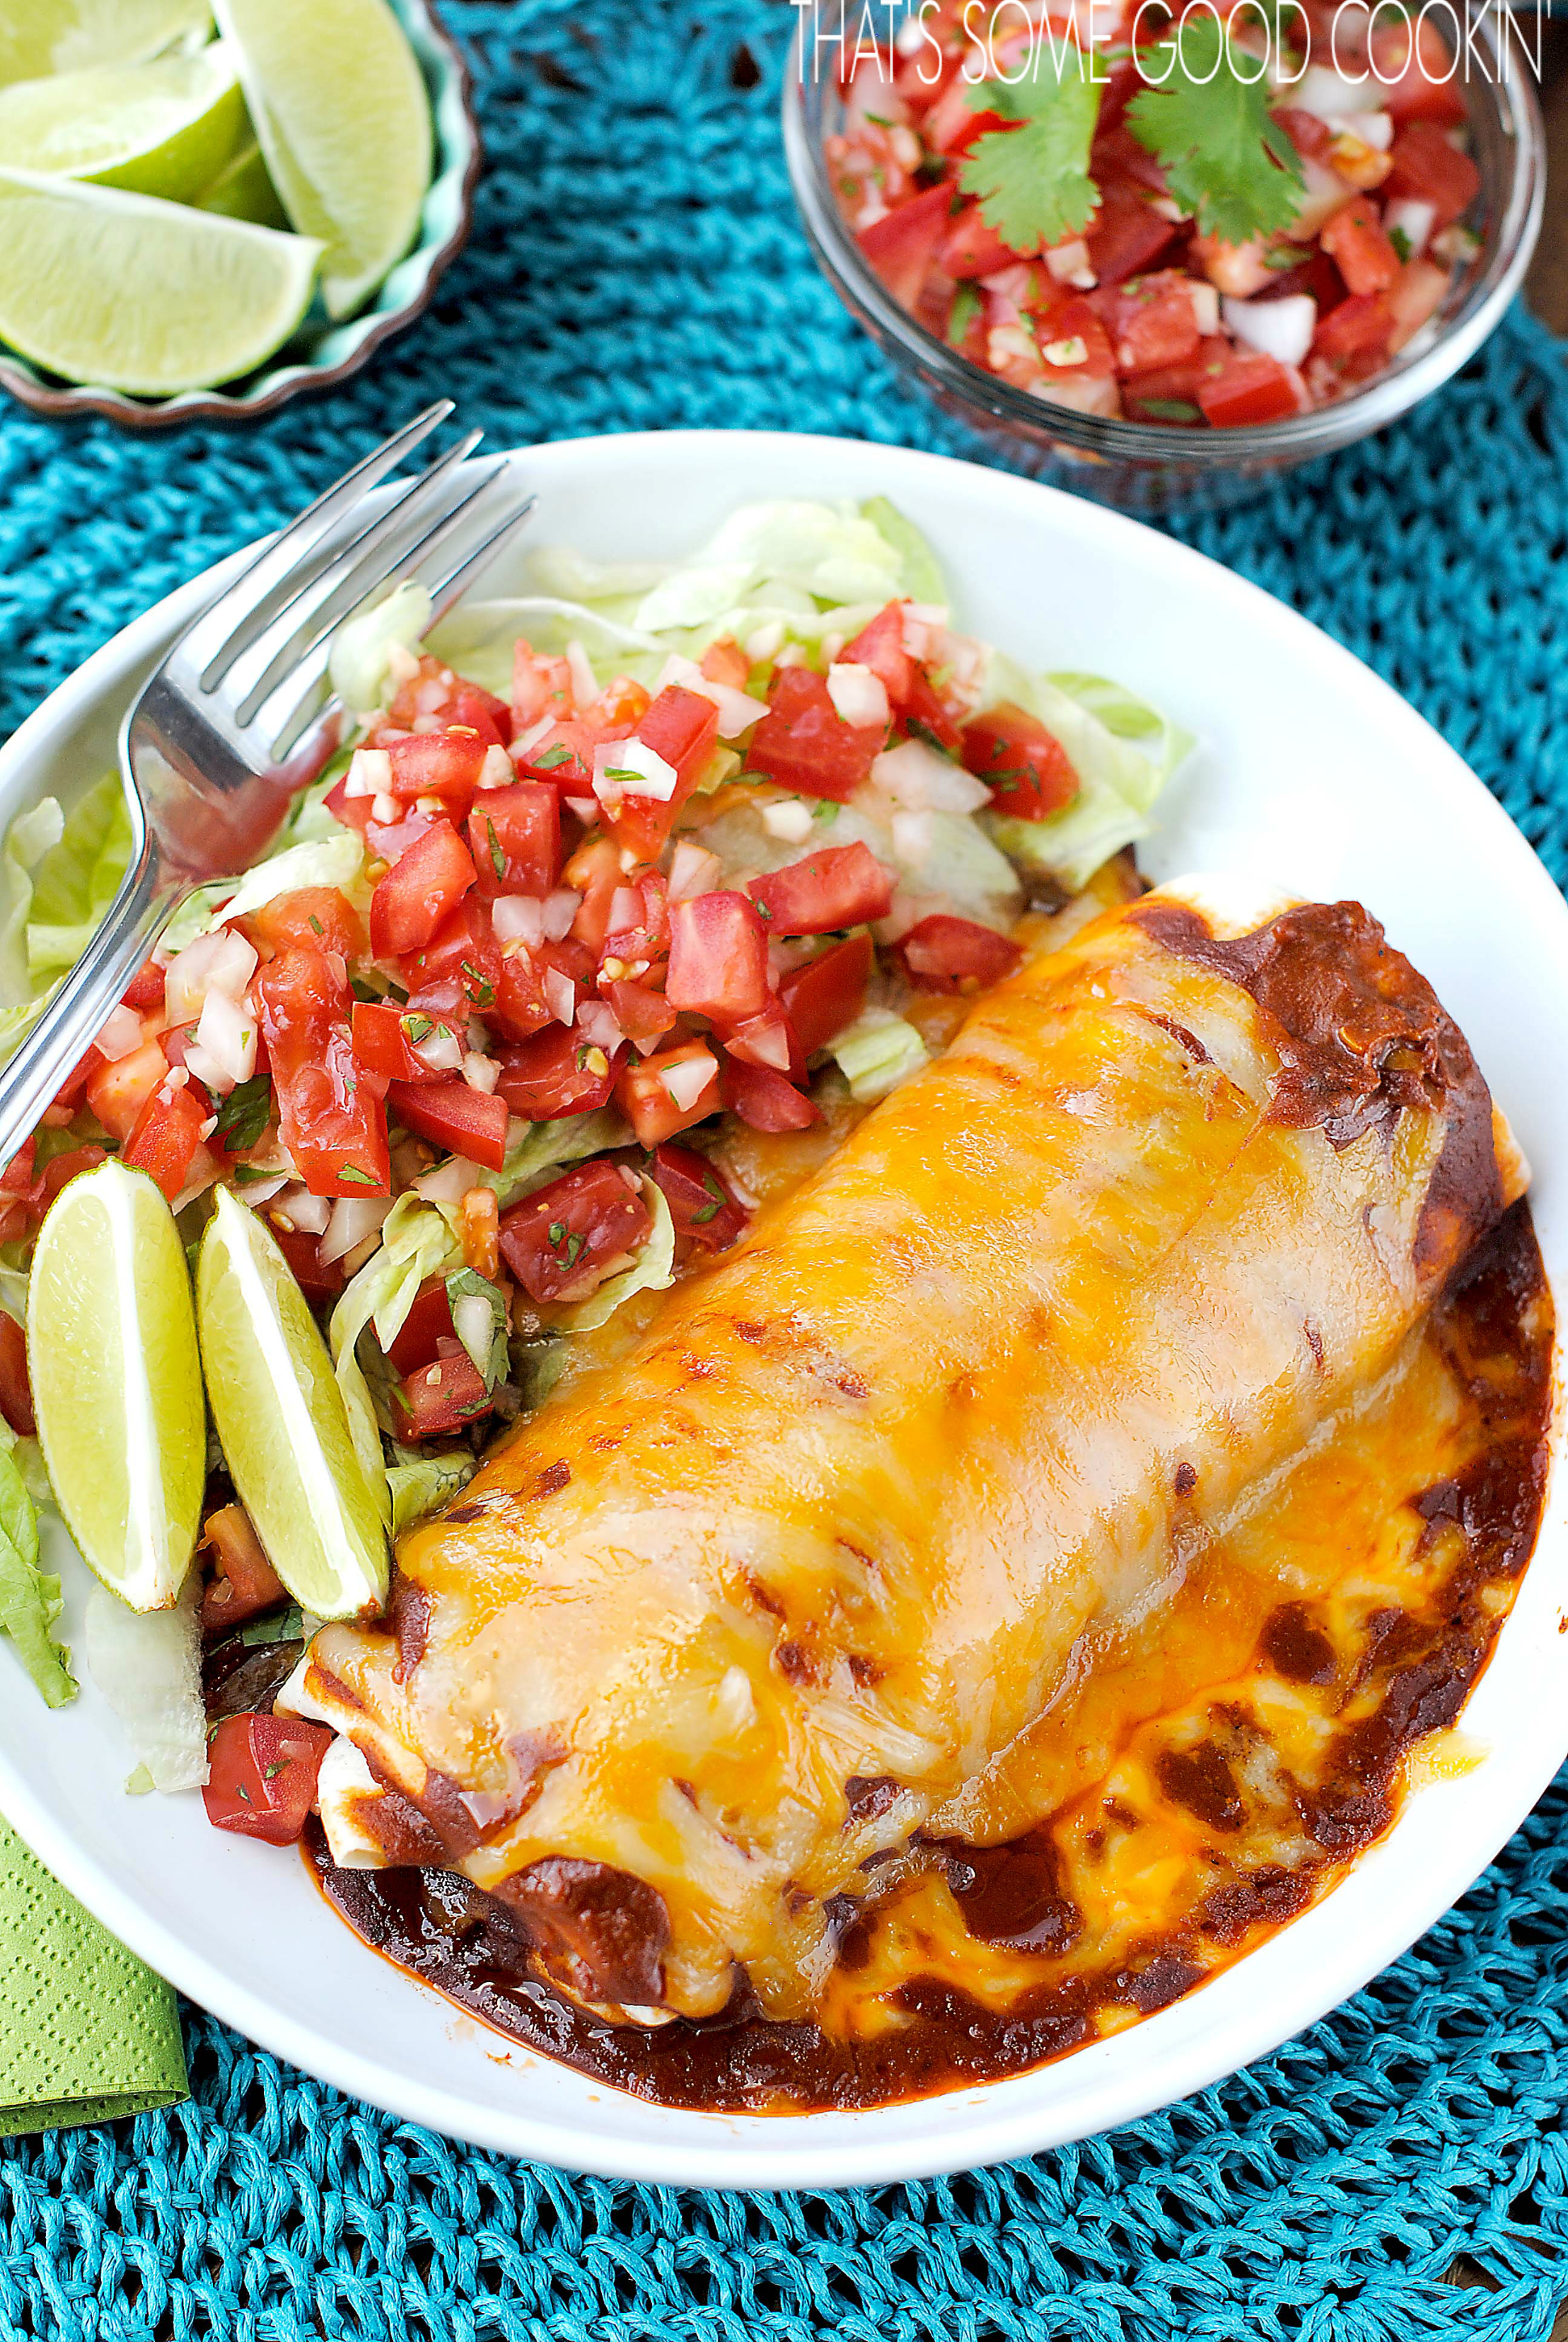 Smothered Burritos | that's some good cookin'--burrito filled with seasoned ground beef, beans and rice, then topped with spicy sauce and lots of cheese